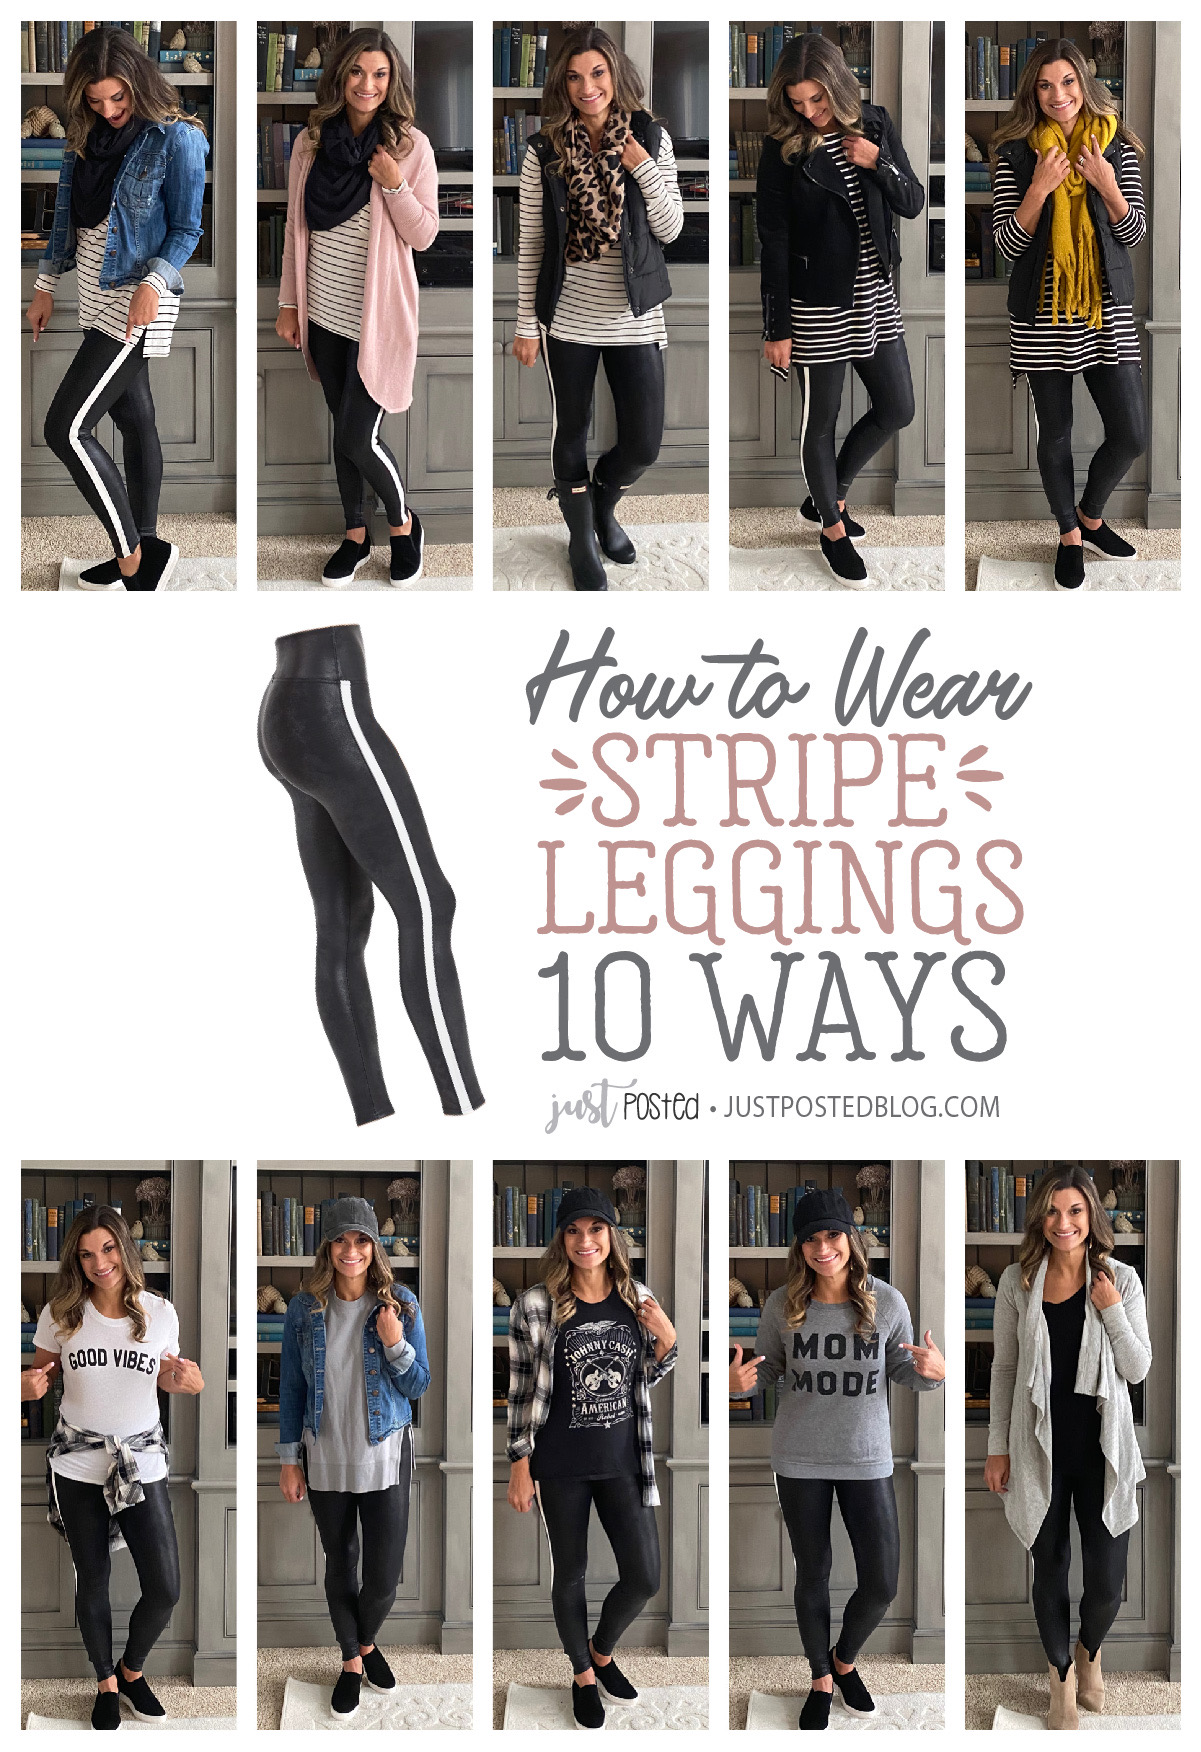 8 More Ways to Wear Black Leggings – Skirt The Rules | NYC Style Blogger